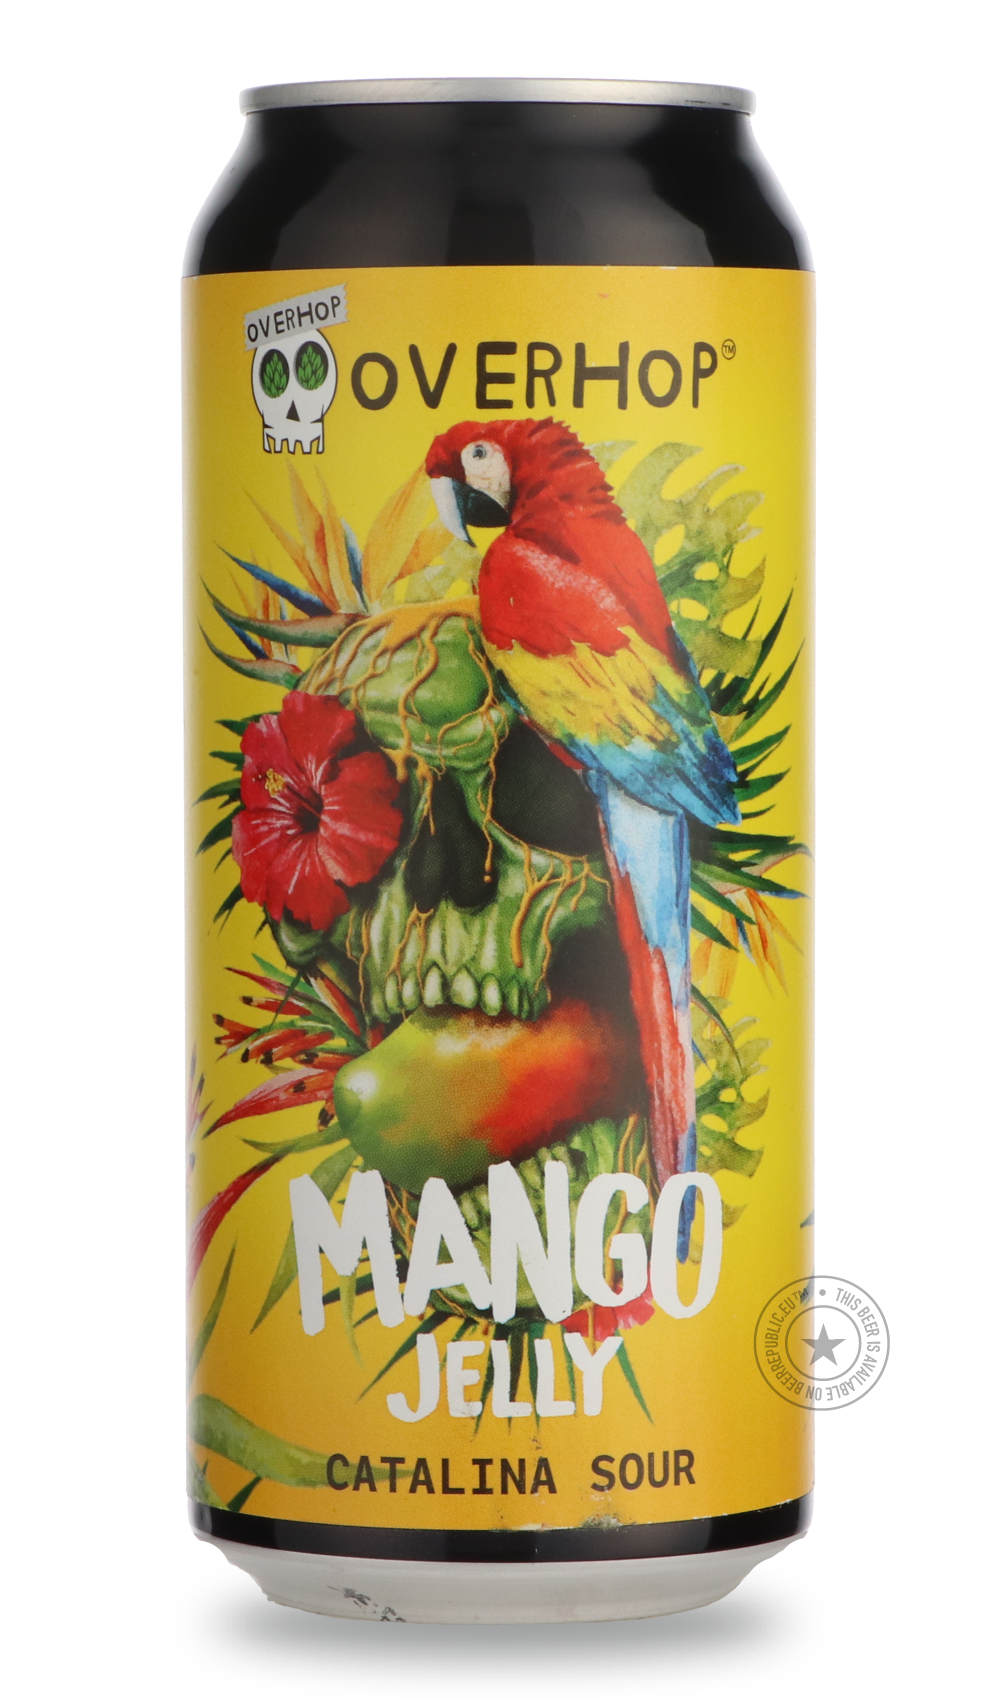 -OverHop Canada- Mango Jelly-Sour / Wild & Fruity- Only @ Beer Republic - The best online beer store for American & Canadian craft beer - Buy beer online from the USA and Canada - Bier online kopen - Amerikaans bier kopen - Craft beer store - Craft beer kopen - Amerikanisch bier kaufen - Bier online kaufen - Acheter biere online - IPA - Stout - Porter - New England IPA - Hazy IPA - Imperial Stout - Barrel Aged - Barrel Aged Imperial Stout - Brown - Dark beer - Blond - Blonde - Pilsner - Lager - Wheat - Weiz